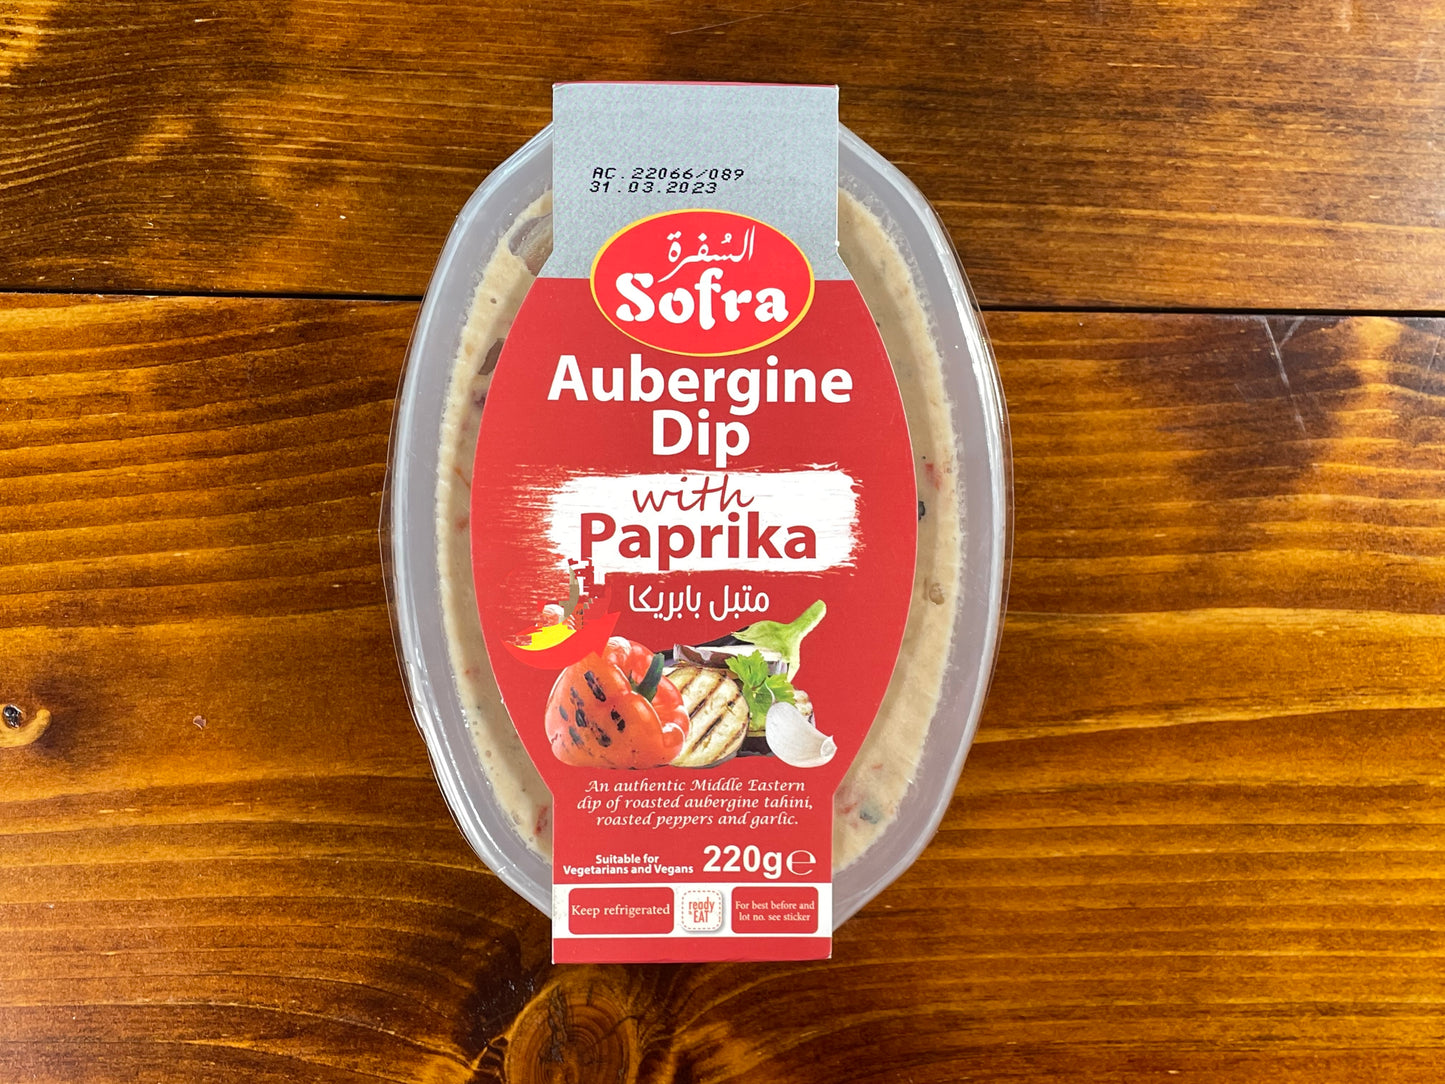 Offer X2 Sofra Aubergine Dip with Paprika 230g